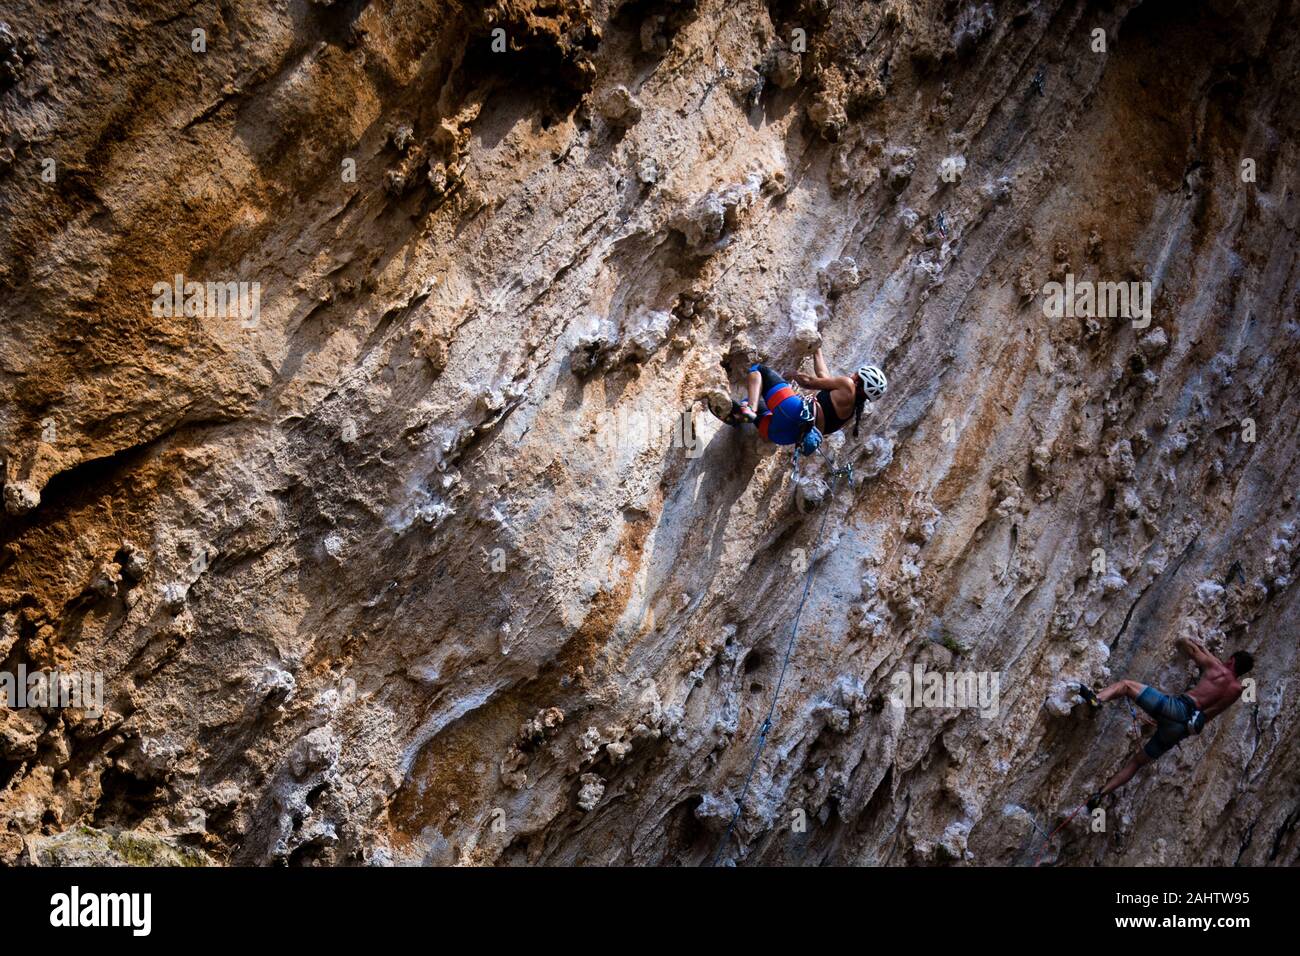 Two Sport Climbers in the Grande Grotta, Kalymnos, Greece Stock Photo